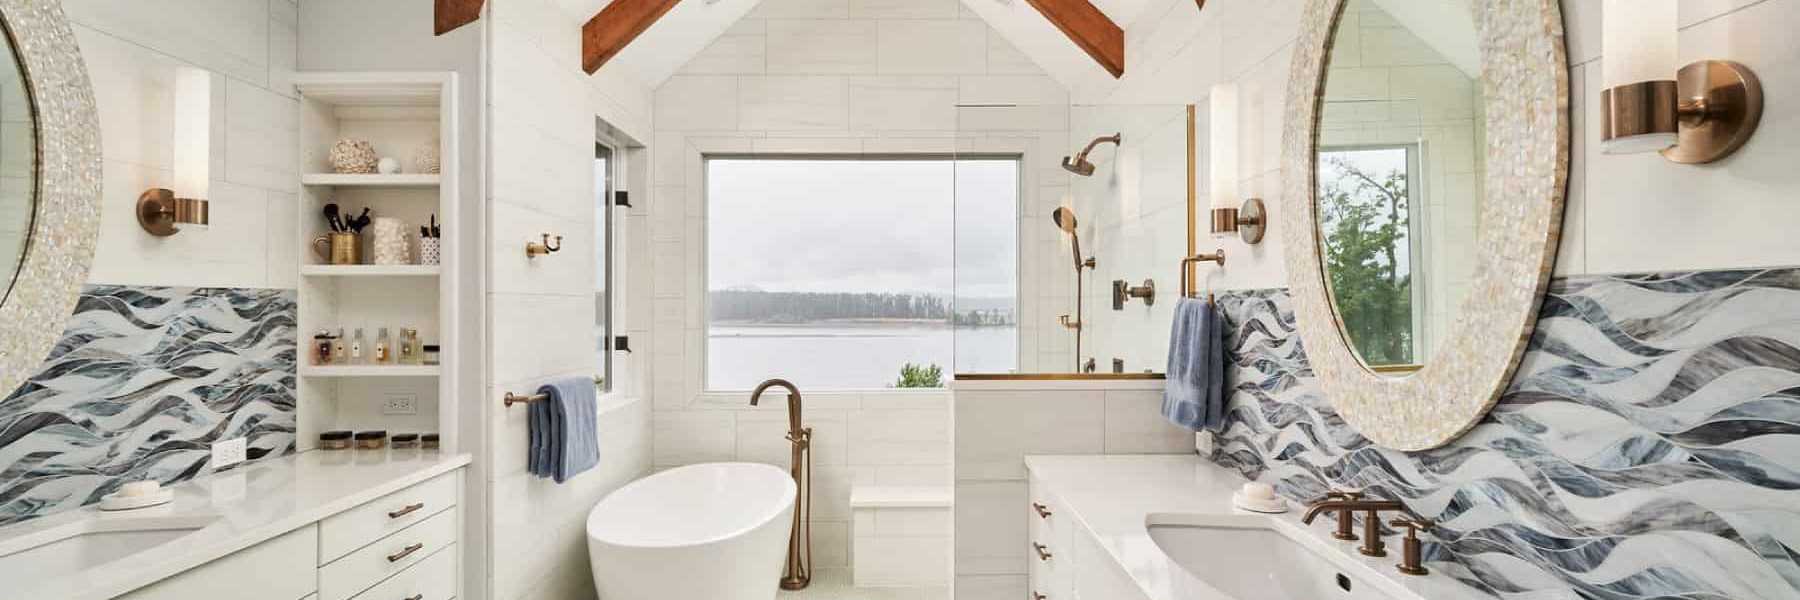 remodeled your bathroom